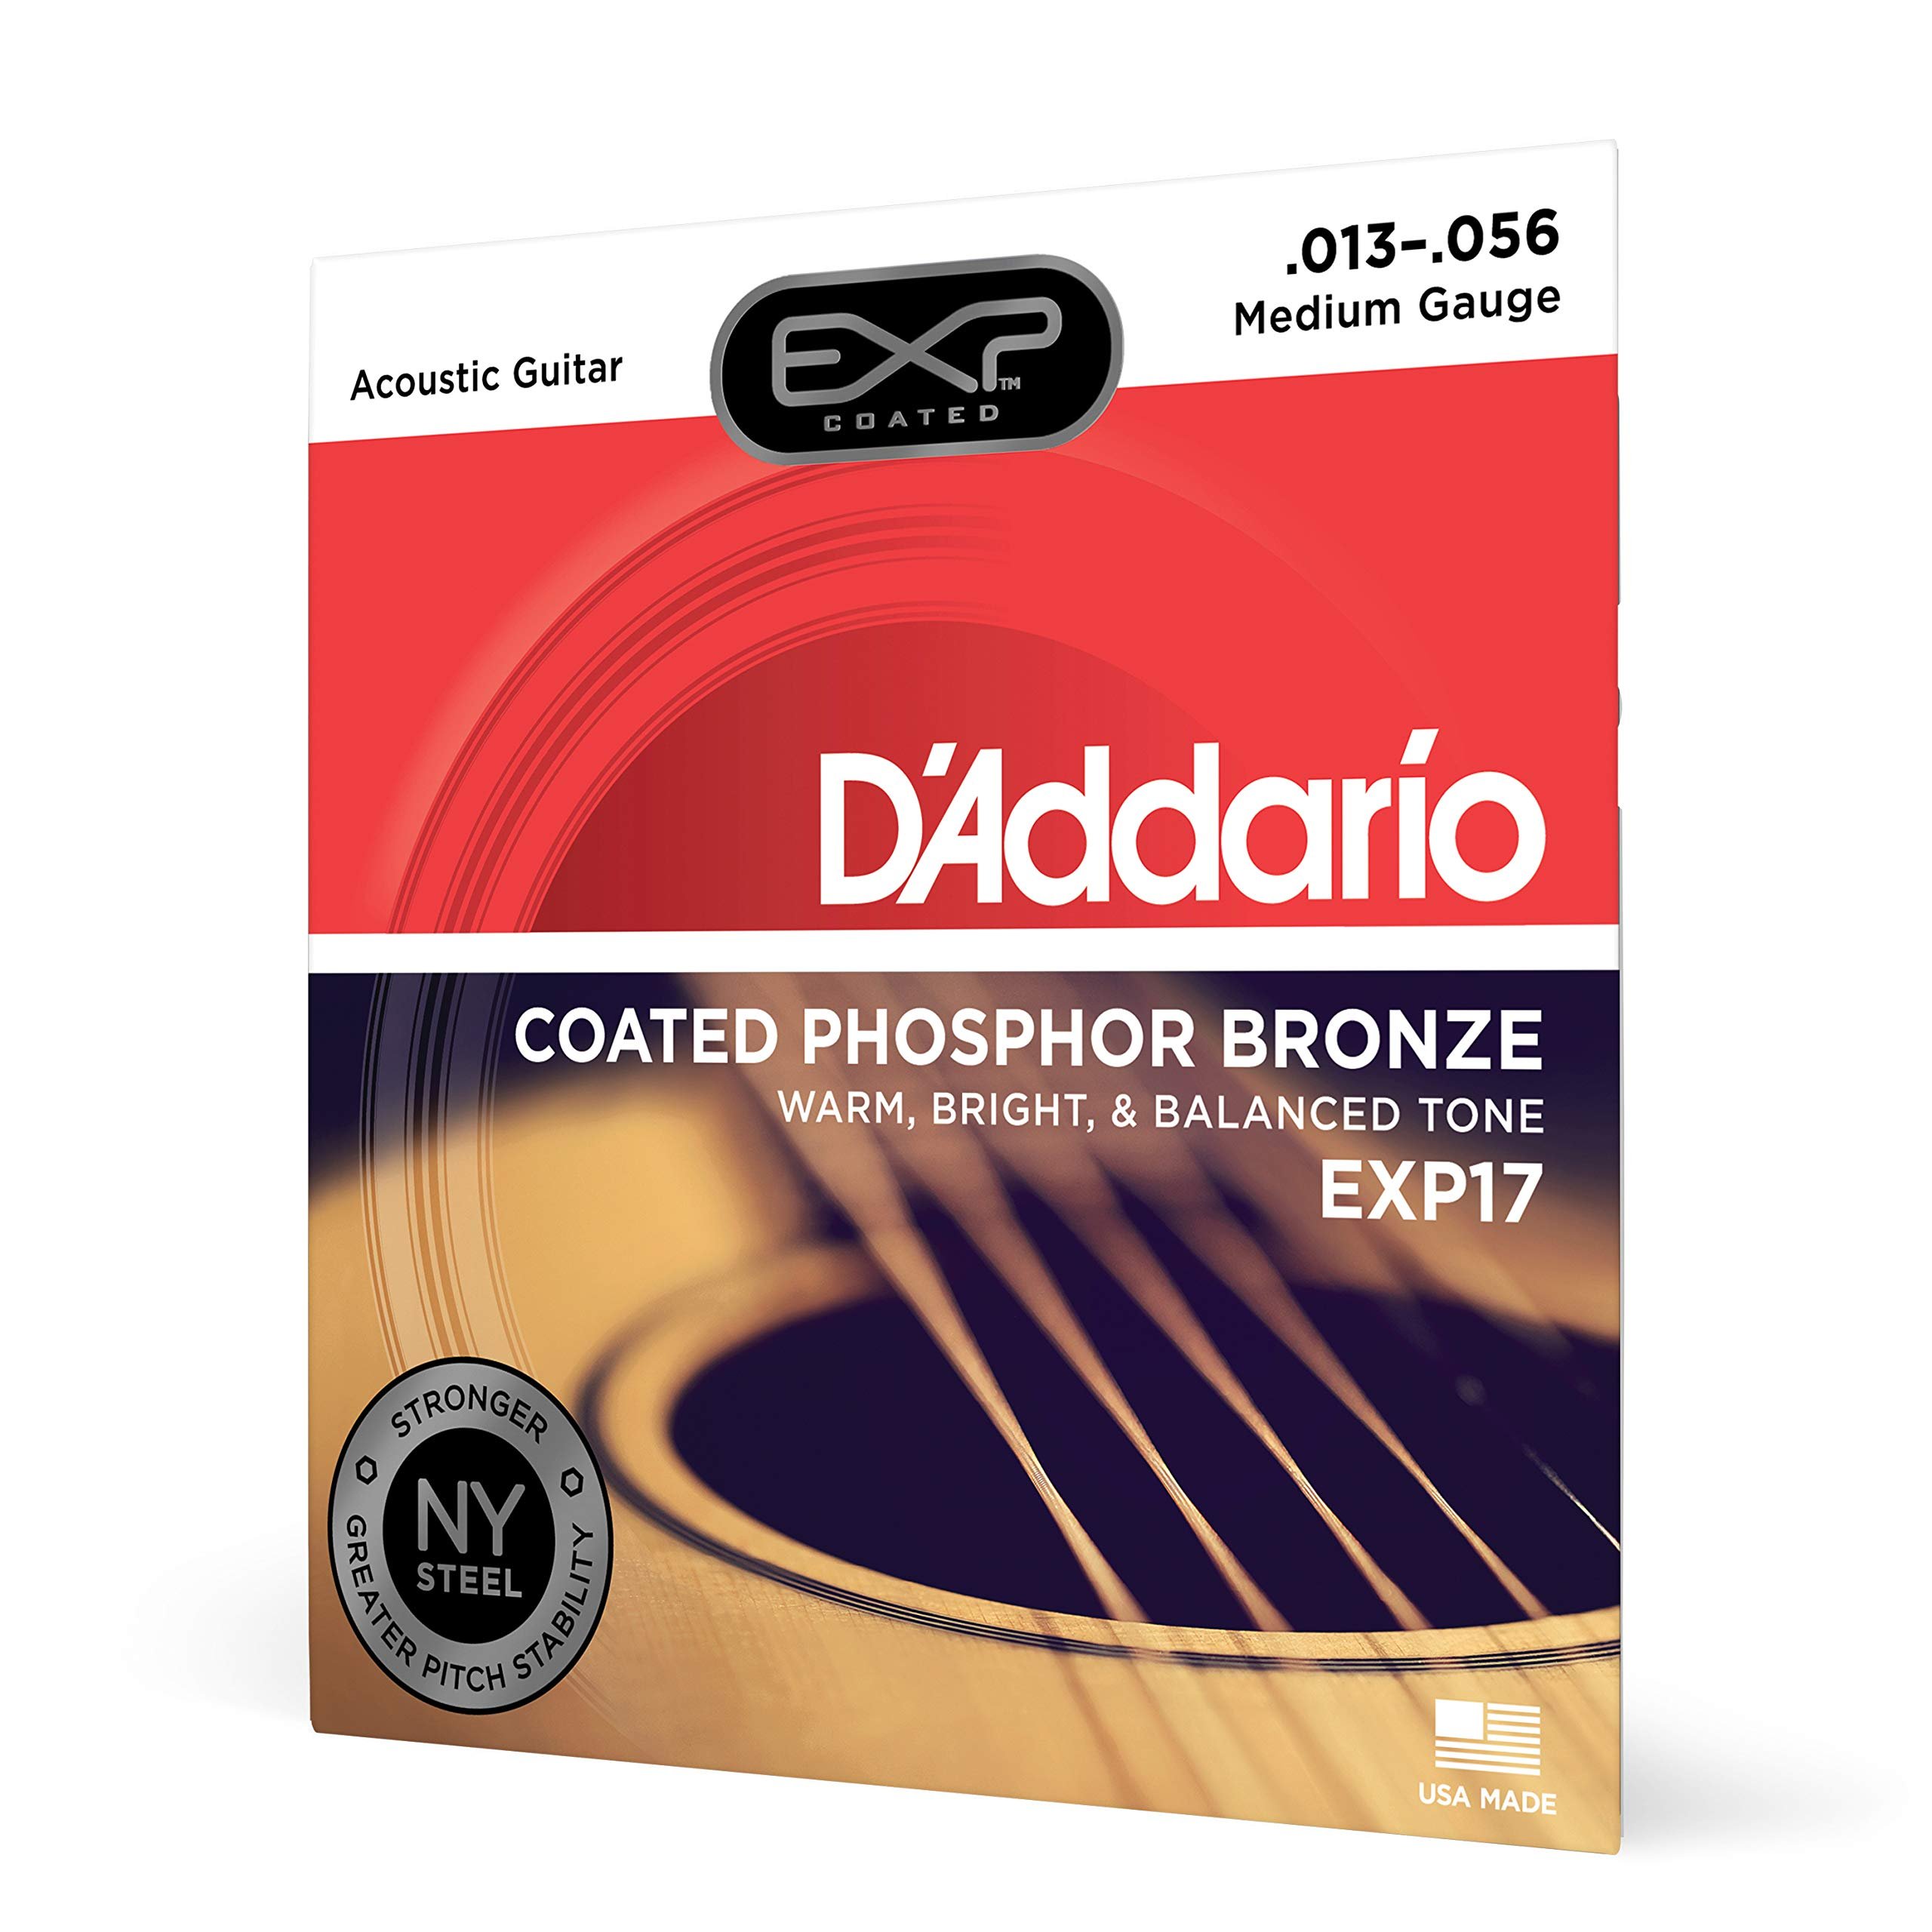 Book Cover D’Addario EXP17 Coated Phosphor Bronze Acoustic Guitar Strings, Light, 13-56 – Offers a Warm, Bright and Well-Balanced Acoustic Tone and 4x Longer Life - With NY Steel for Strength and Pitch Stability Medium, 13-56 1-Pack